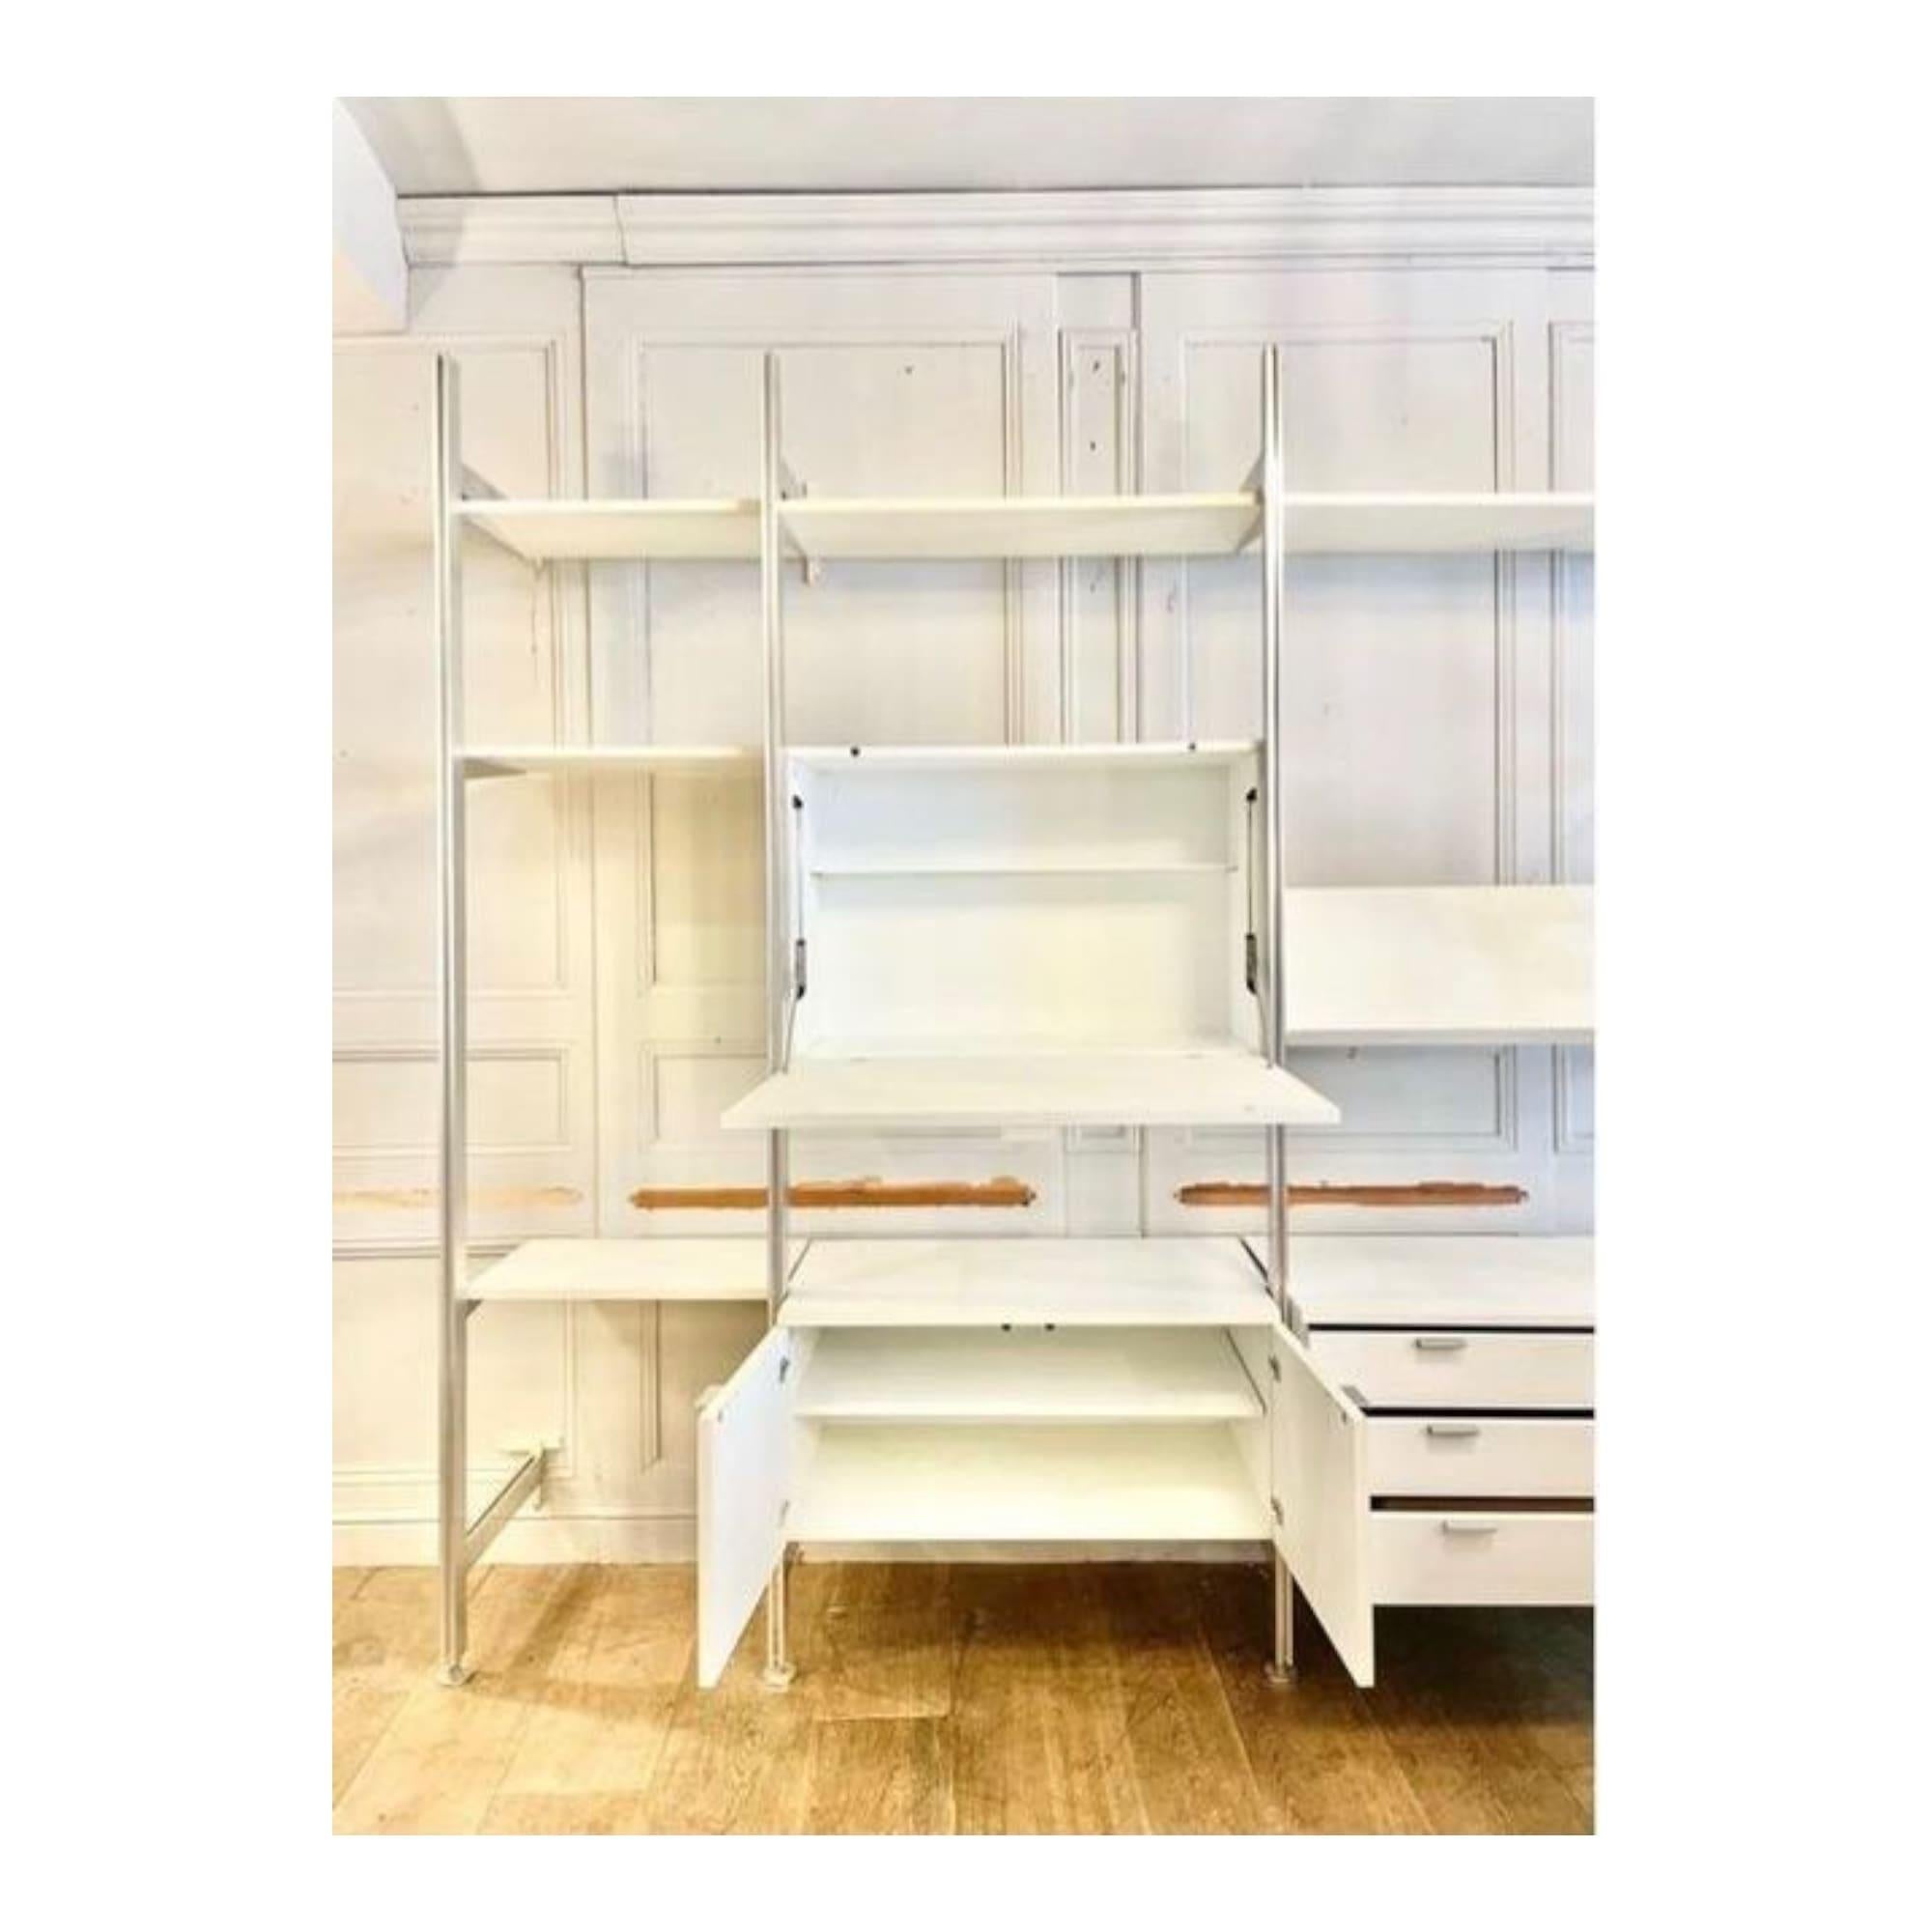 George Nelson's large bookcase, produced by Mobilier International and model CSS (Comprehensive Storage System), is an exceptional piece of antique designed around 1970. This bookcase is a true masterpiece of design, combining functionality and